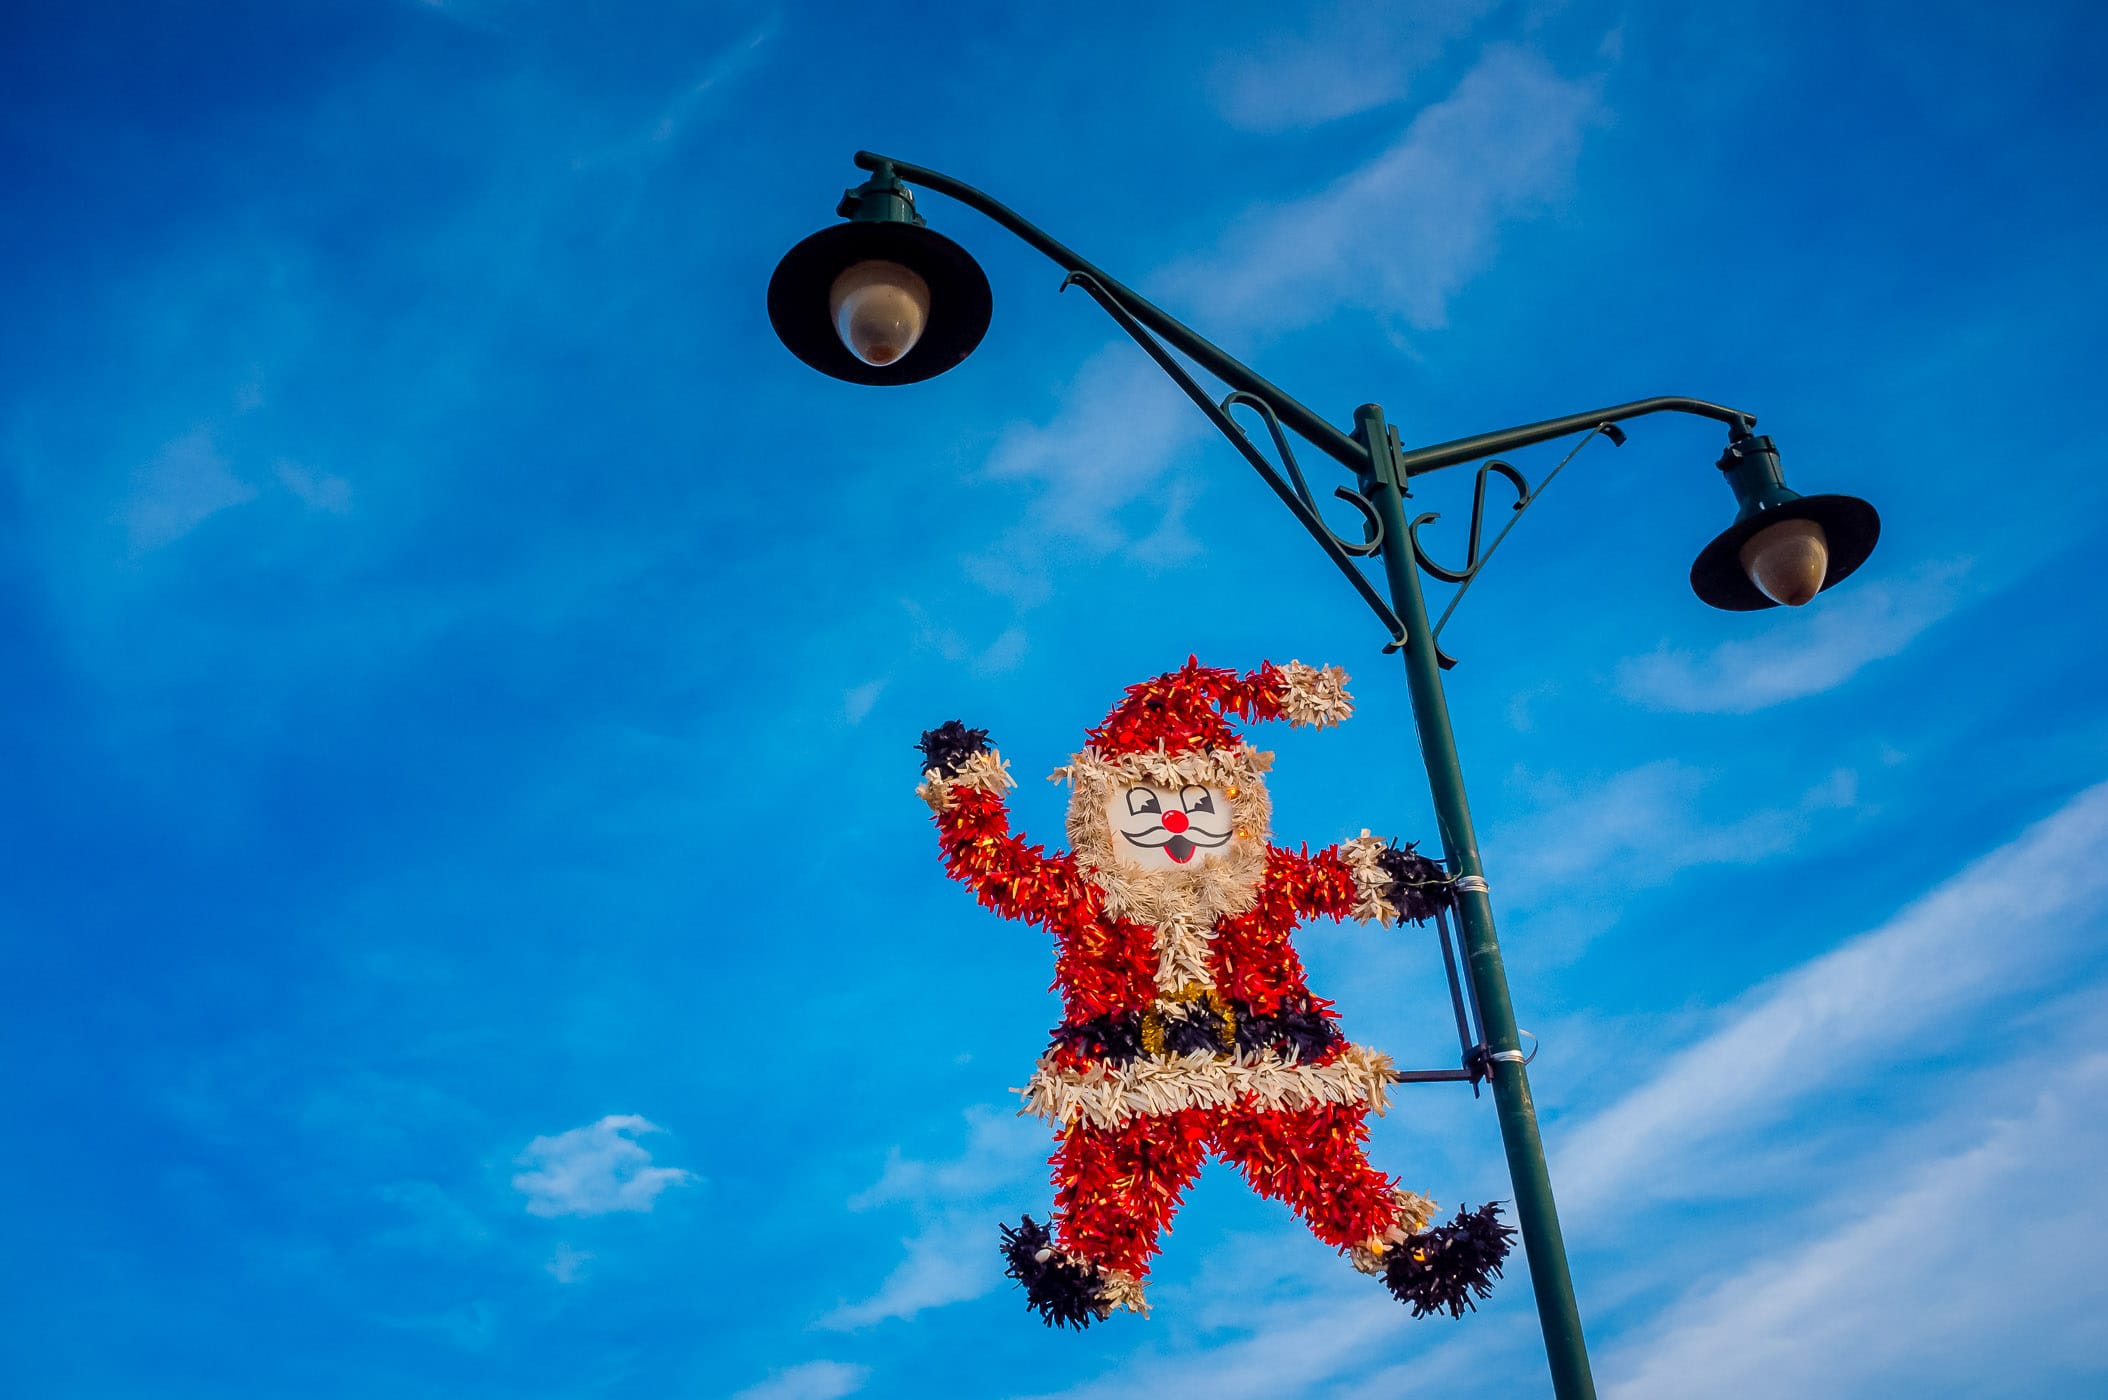 A decorative Santa Claus Christmas decoration hangs from a light pole in Granbury, Texas.